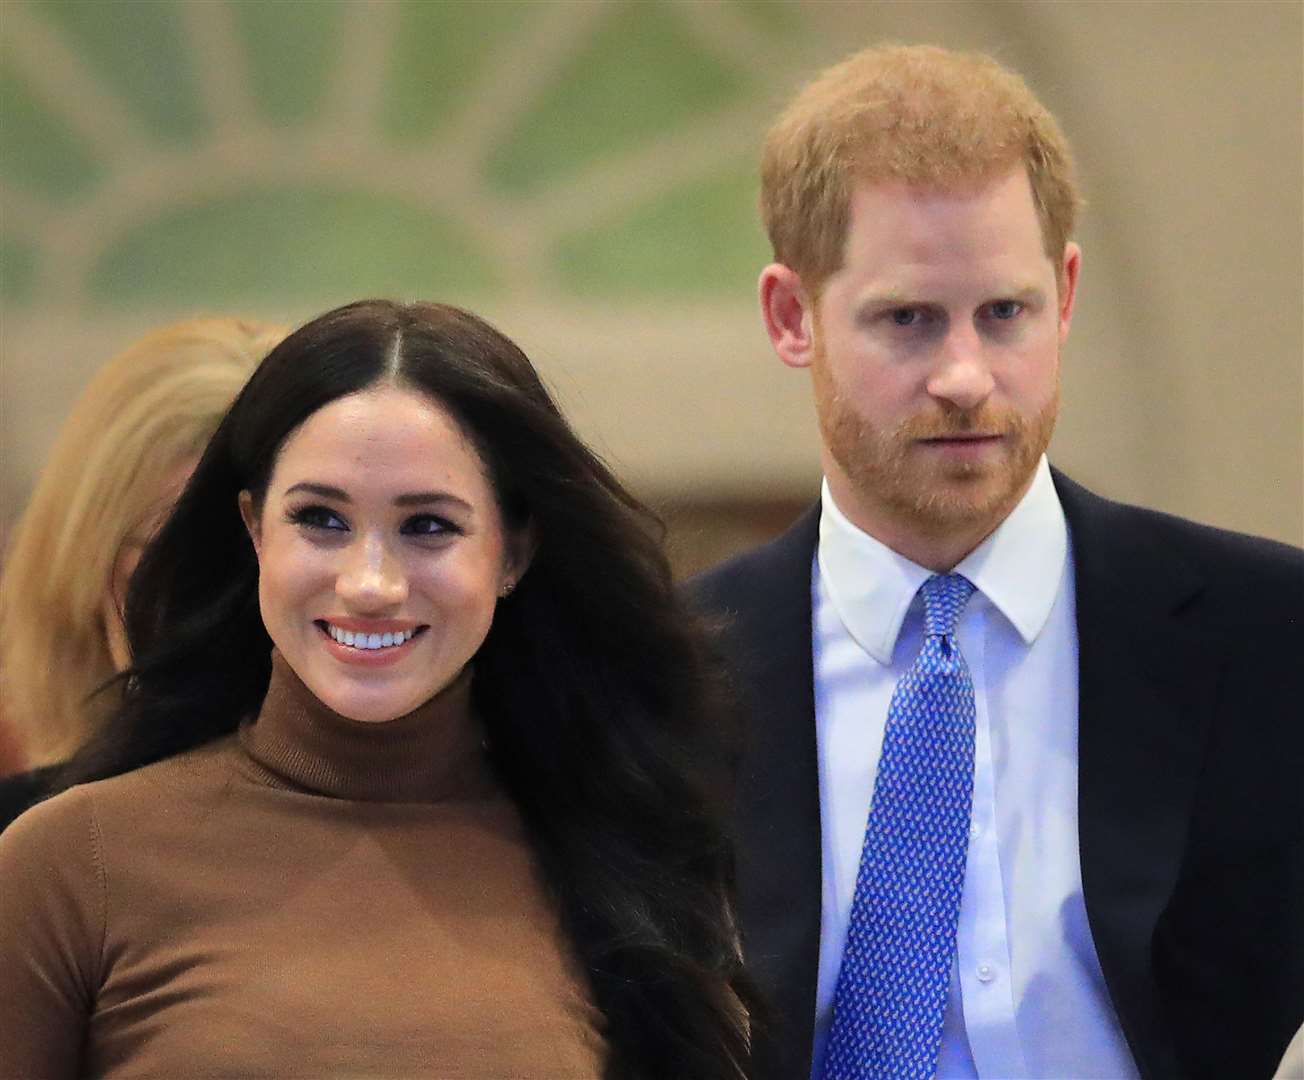 Meghan and Harry have spent much of their time in lockdown since leaving the monarchy (Aaron Chown/PA)